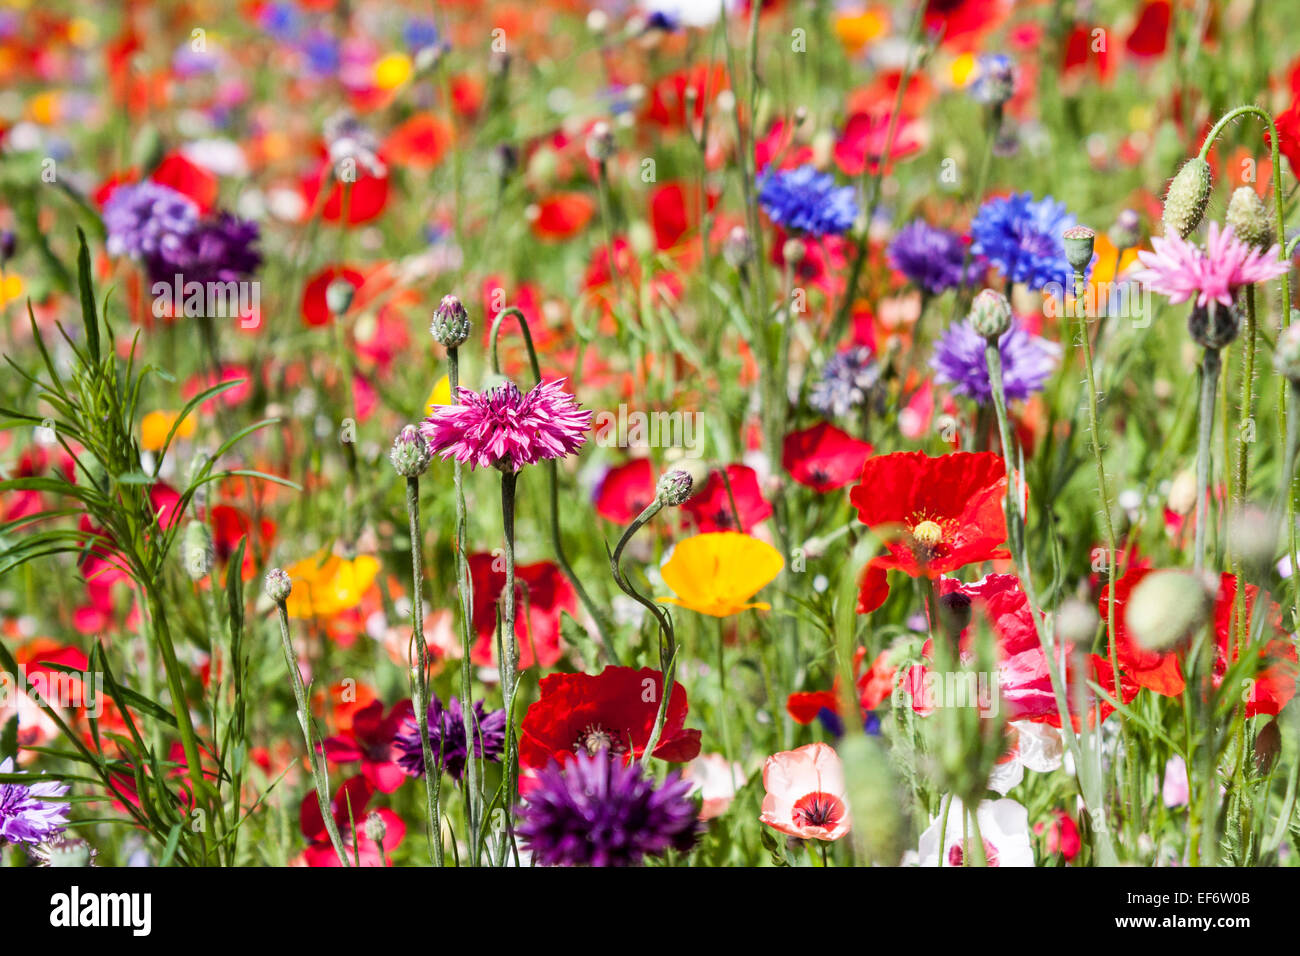 A grass verge planted with a selection of poppies, cornflowers and other wildflowers. Berkshire, England, GB, UK Stock Photo